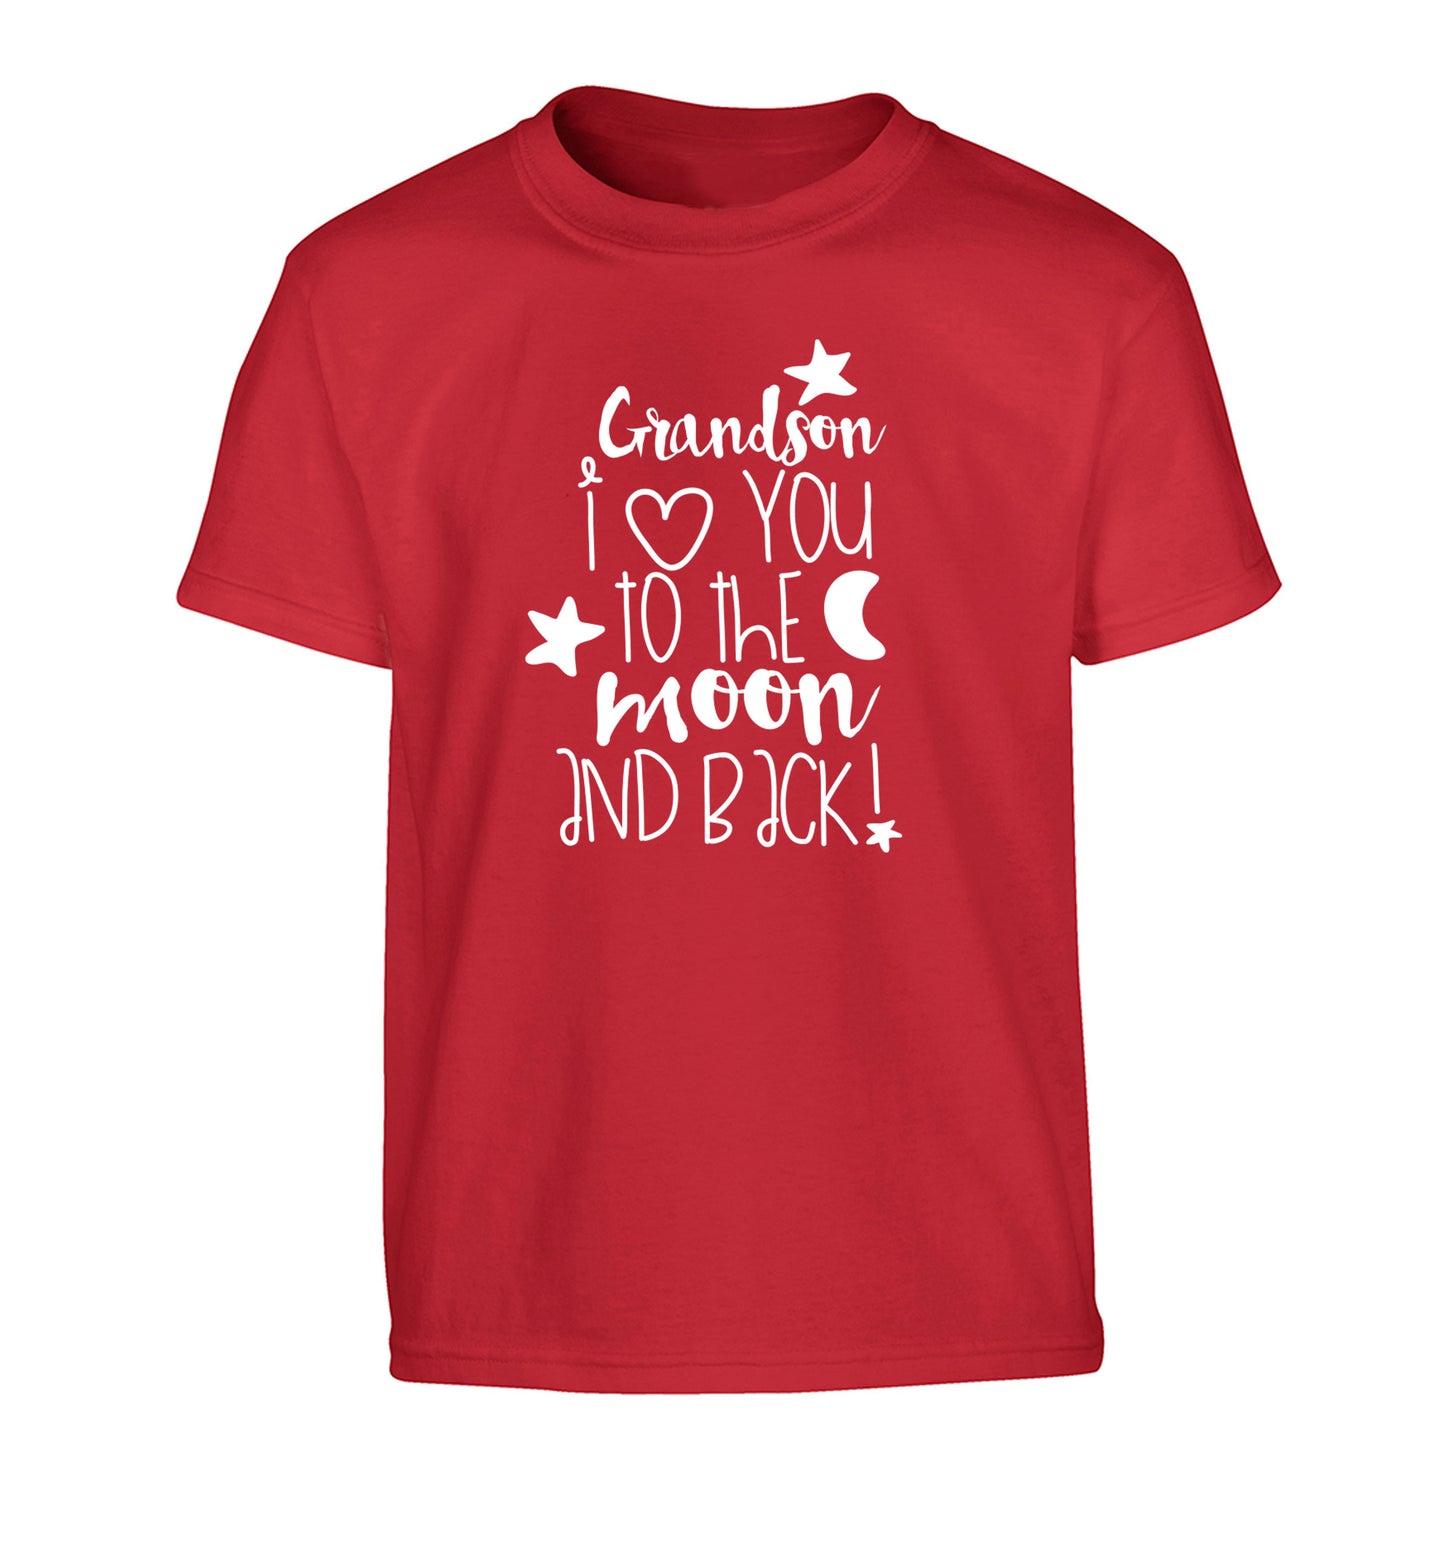 Grandson I love you to the moon and back Children's red Tshirt 12-14 Years